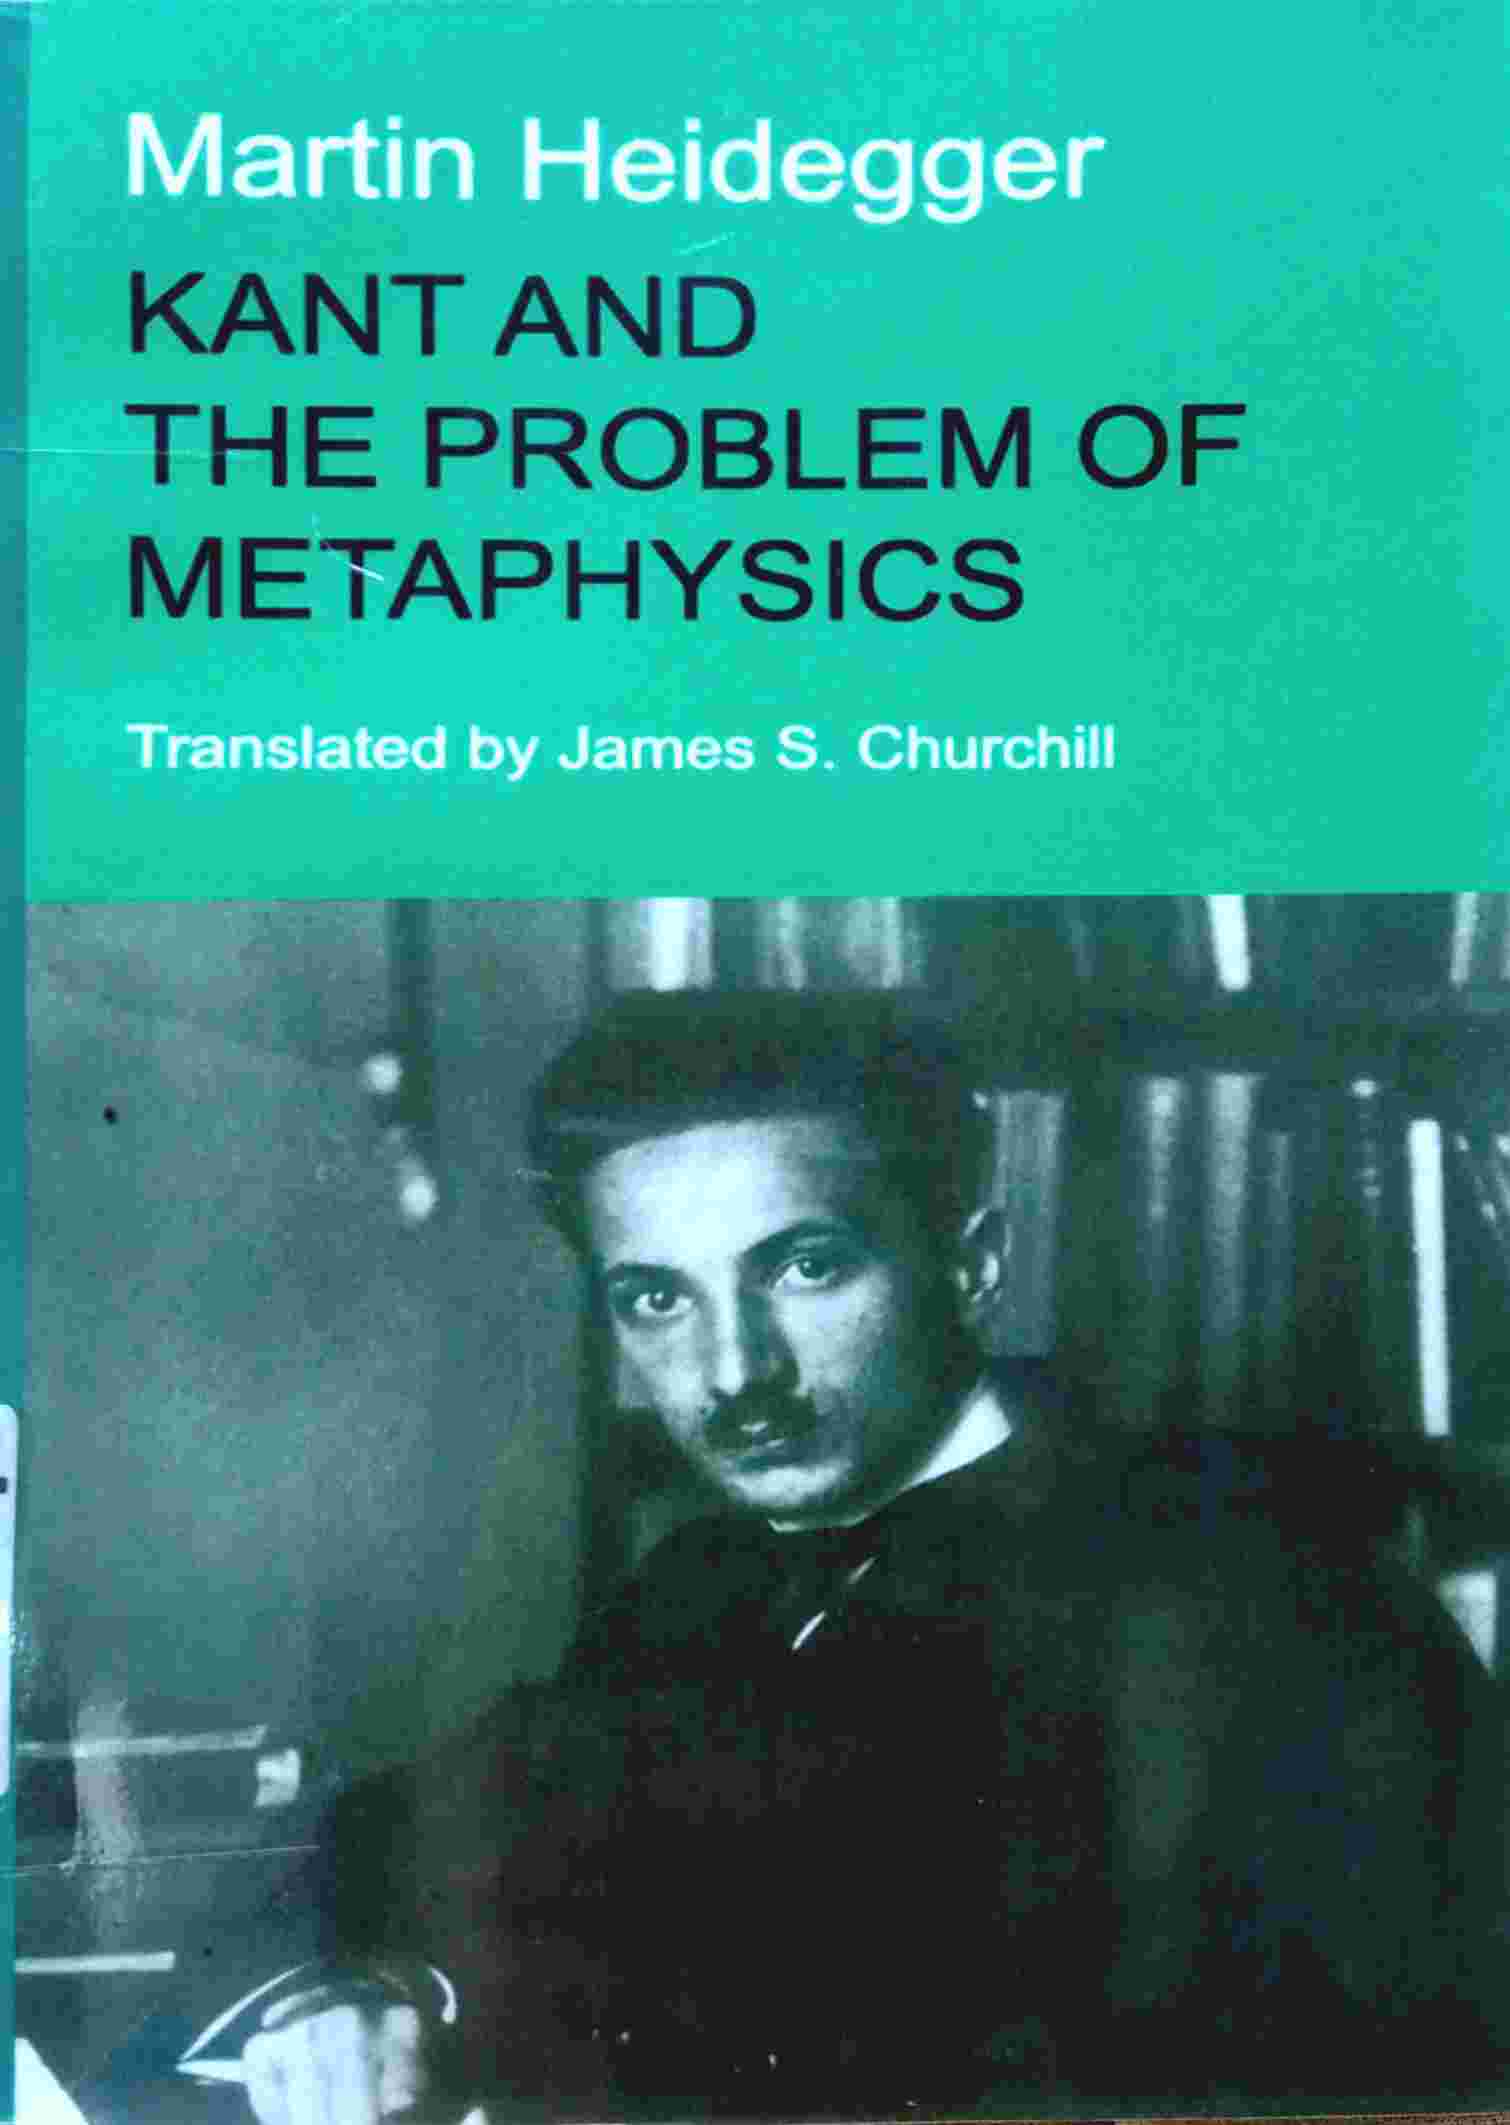 KANT AND THE PROBLEM OF METAPHYSICS